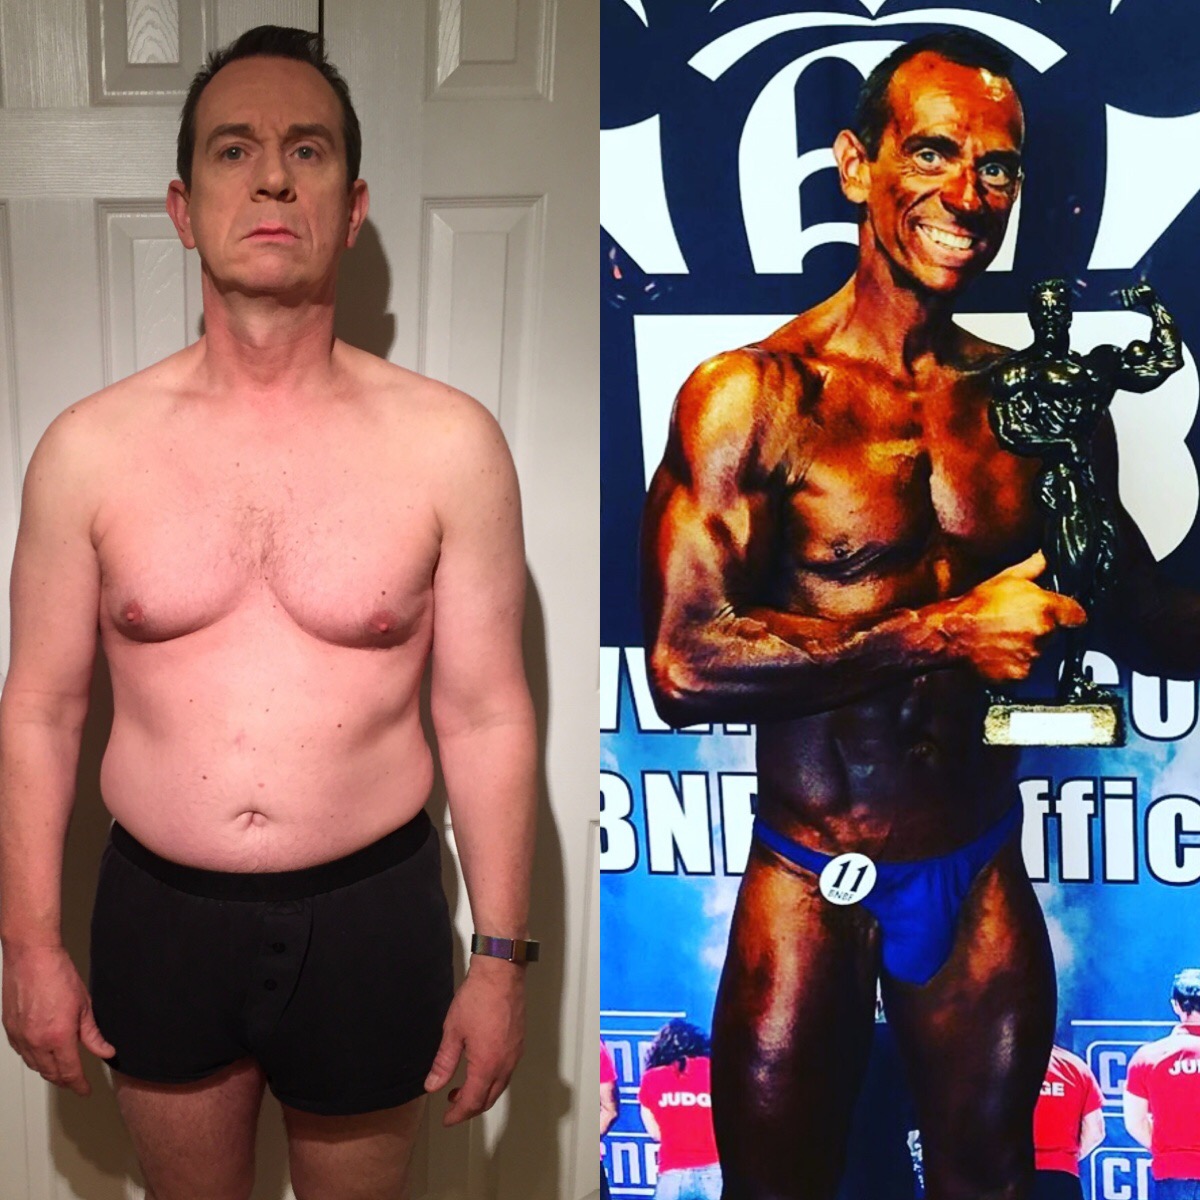 Image linking to the 2020 page for details of  and the  on offer there: 2019 news from Celebrity Personal Trainer Tim Sharp